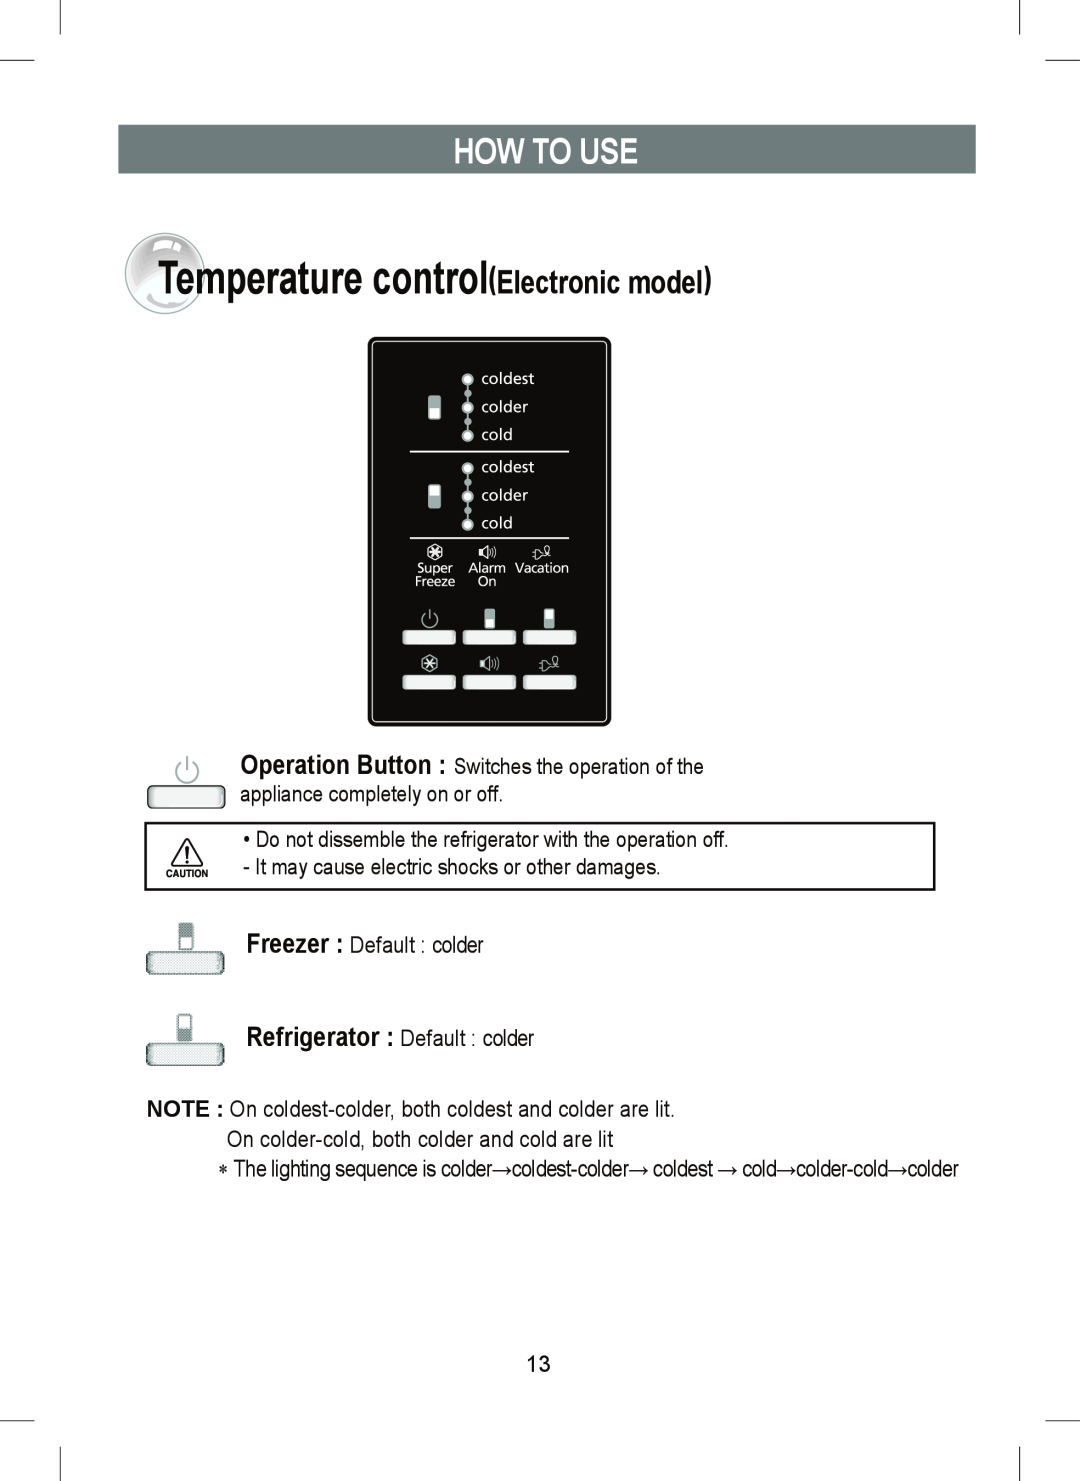 Samsung RT41E, RT45M, RT41M manual Temperature controlElectronic model, How To Use 